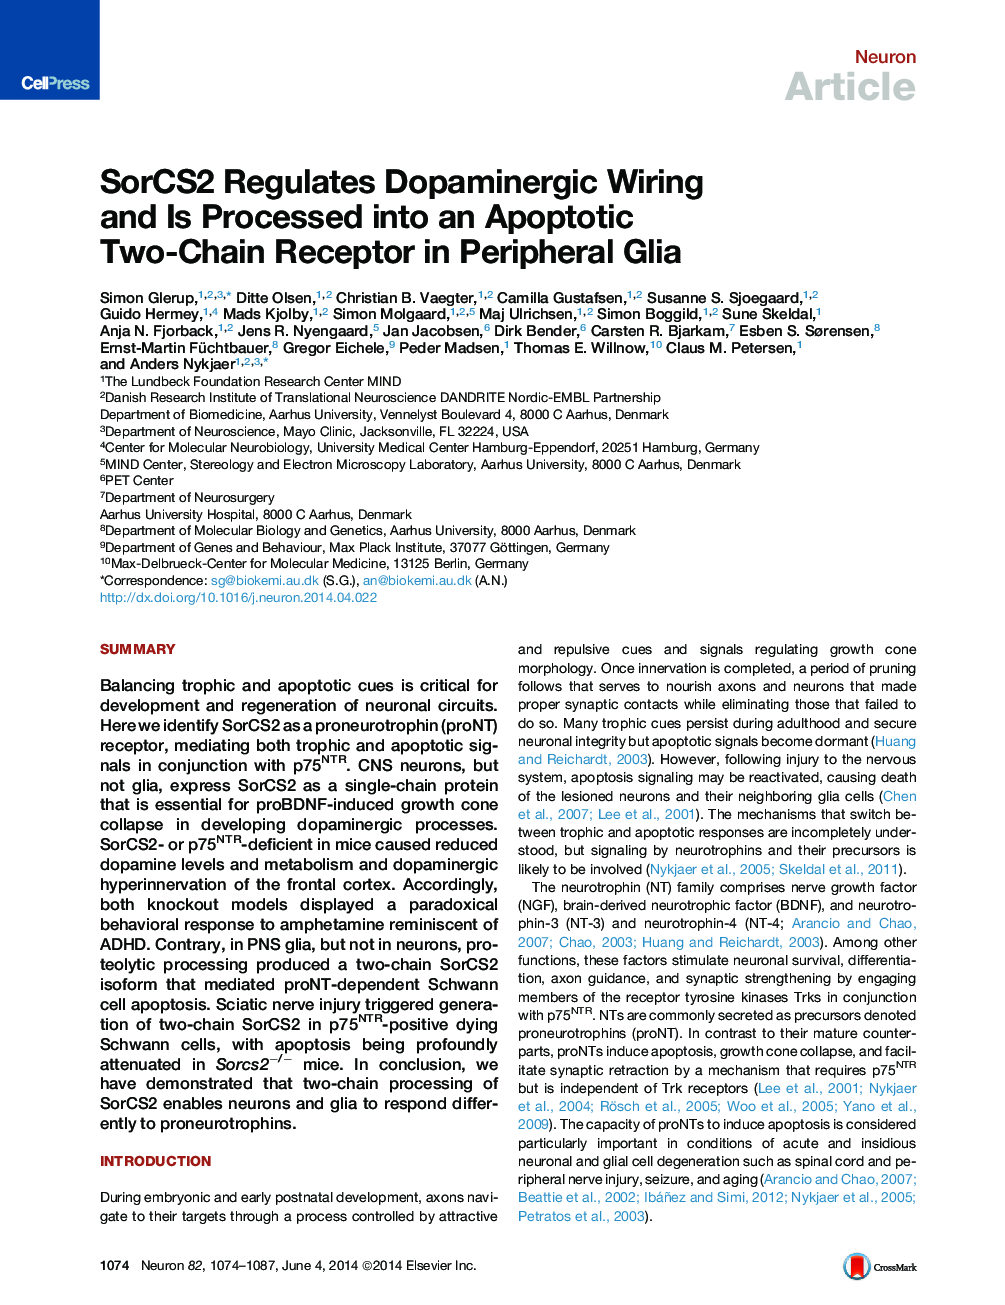 SorCS2 Regulates Dopaminergic Wiring and Is Processed into an Apoptotic Two-Chain Receptor in Peripheral Glia